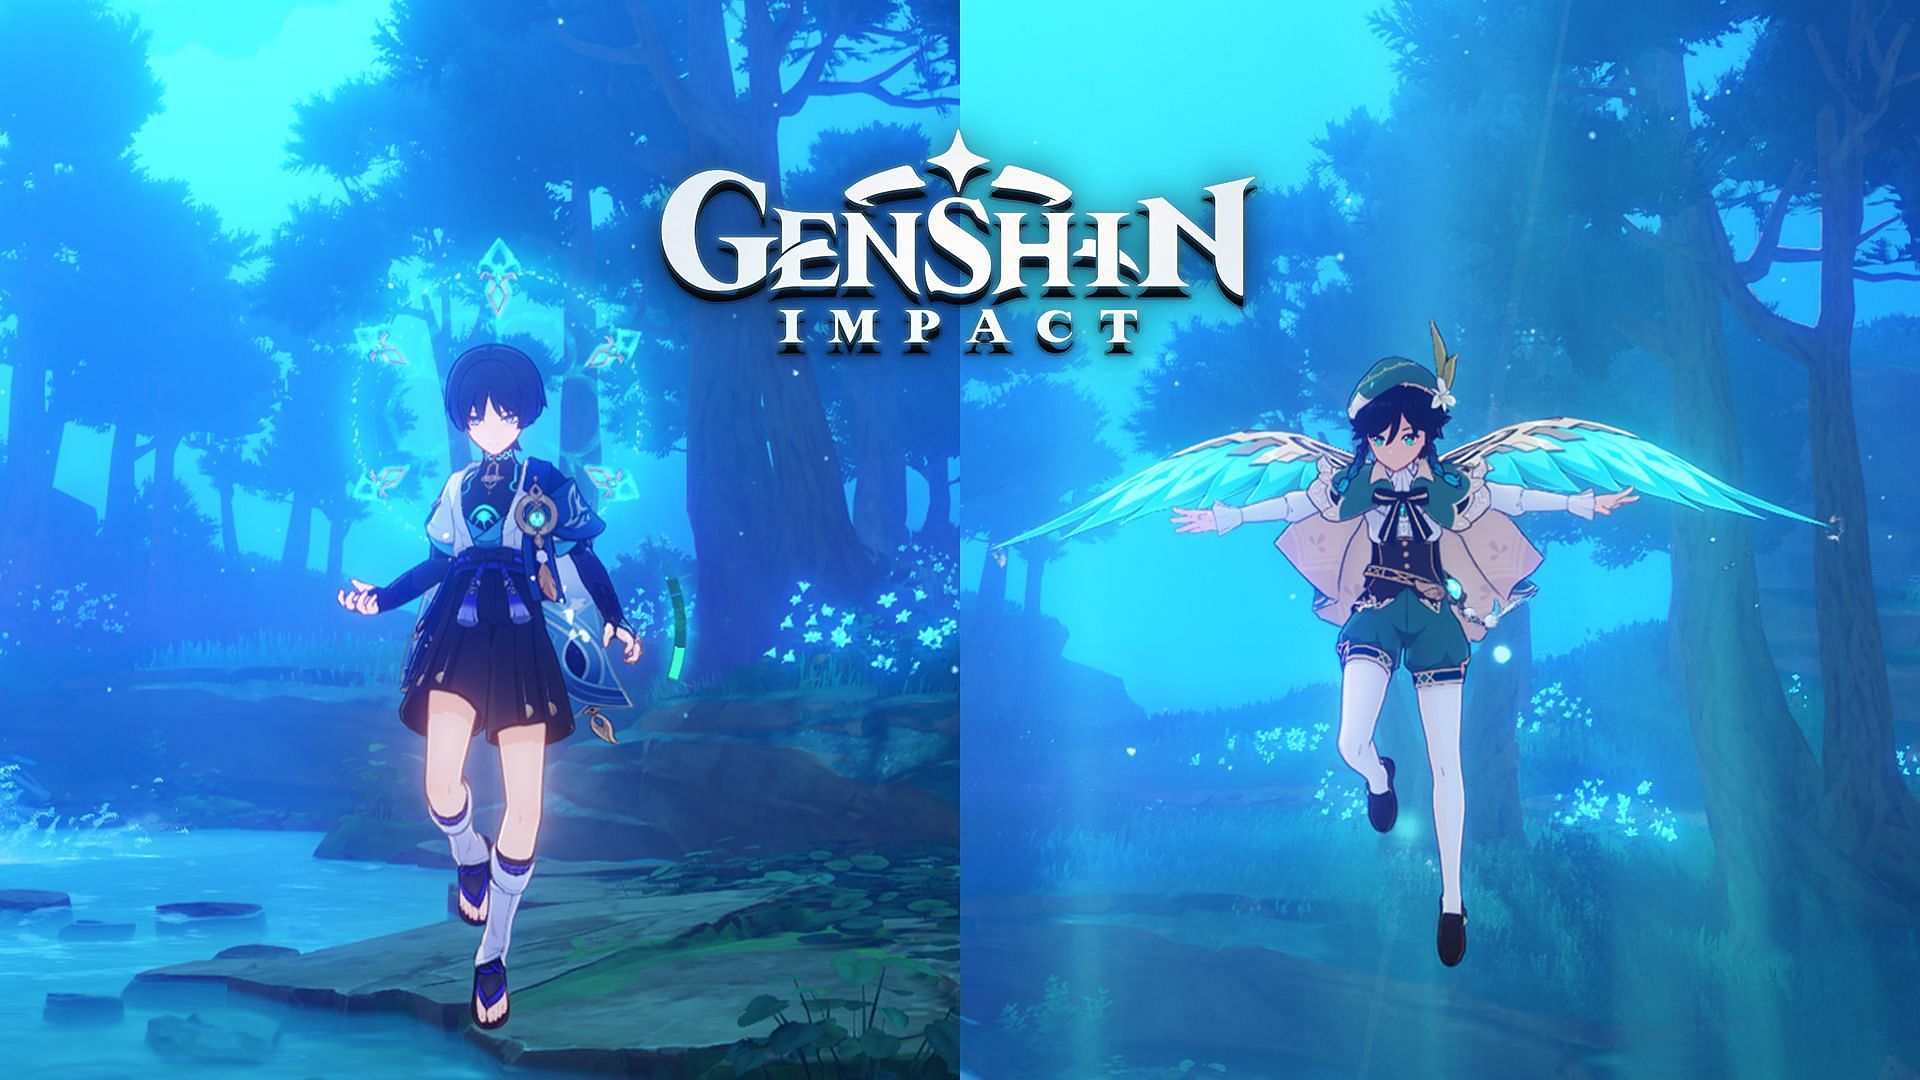 This article will list the best characters for overworld exploration in Genshin Impact.